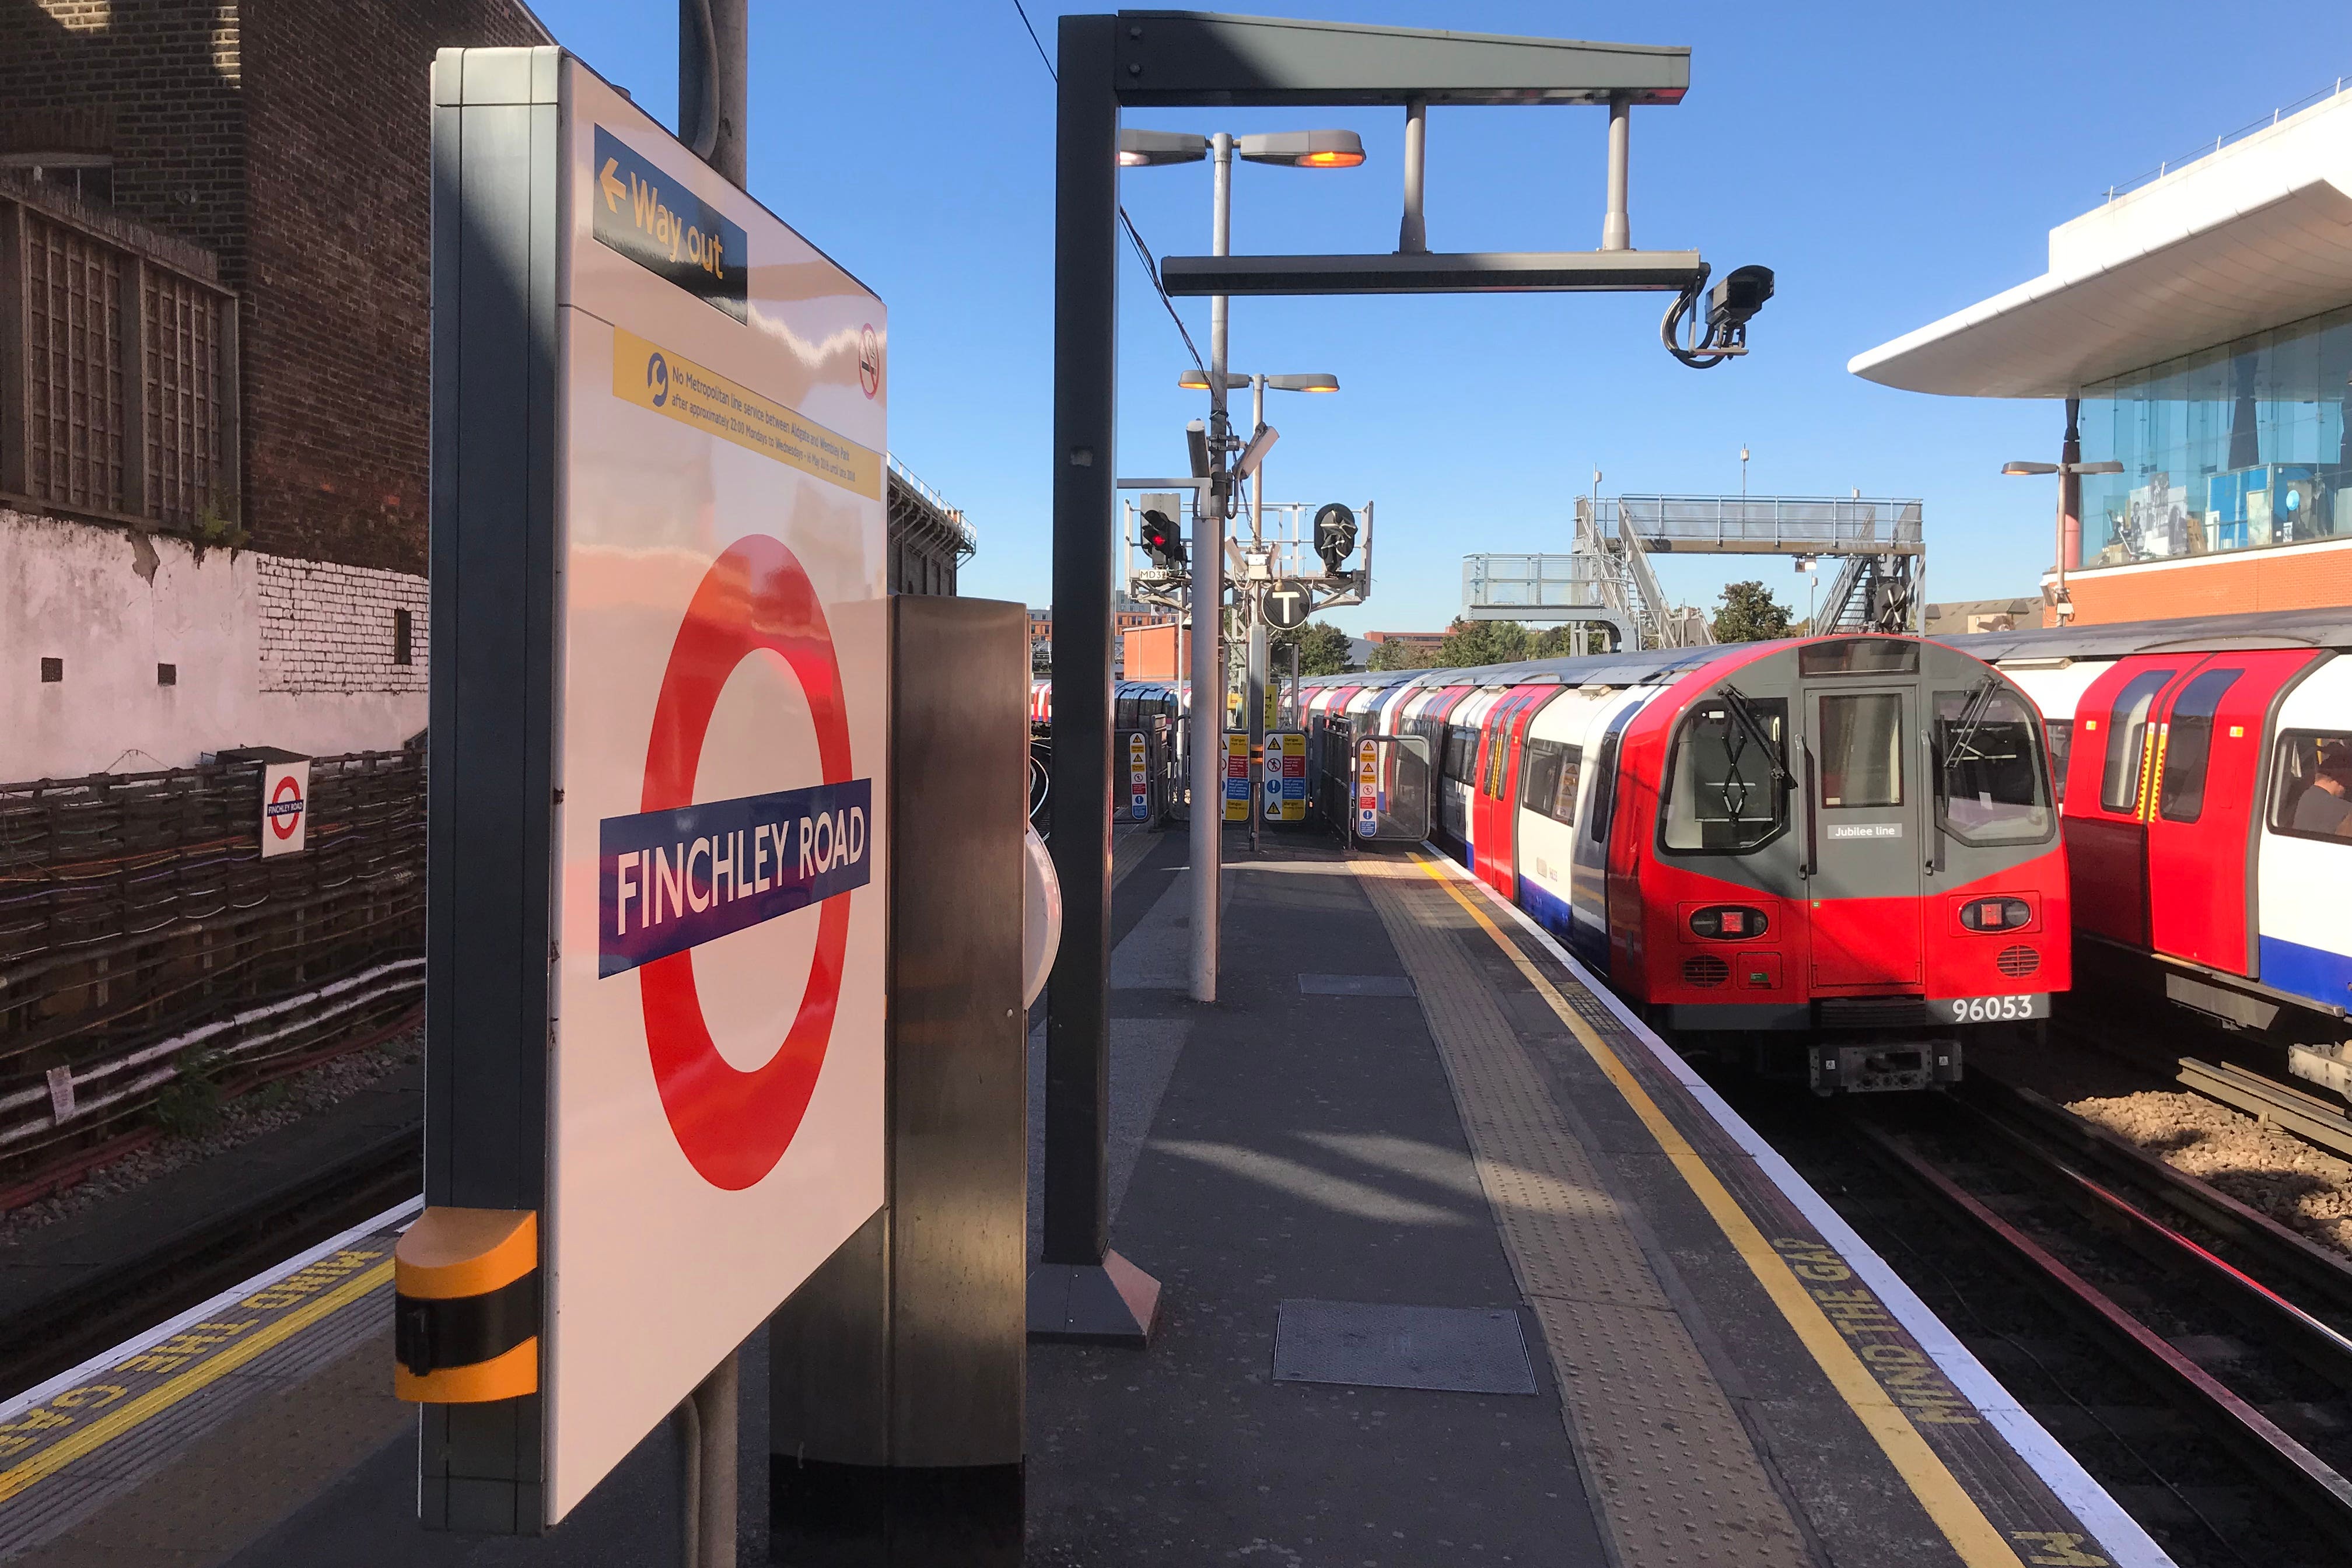 Photo issued by the Rail Accidents Investigation Branch (RAIB) of a Jubilee Line train at Finchley Road underground station. PA.